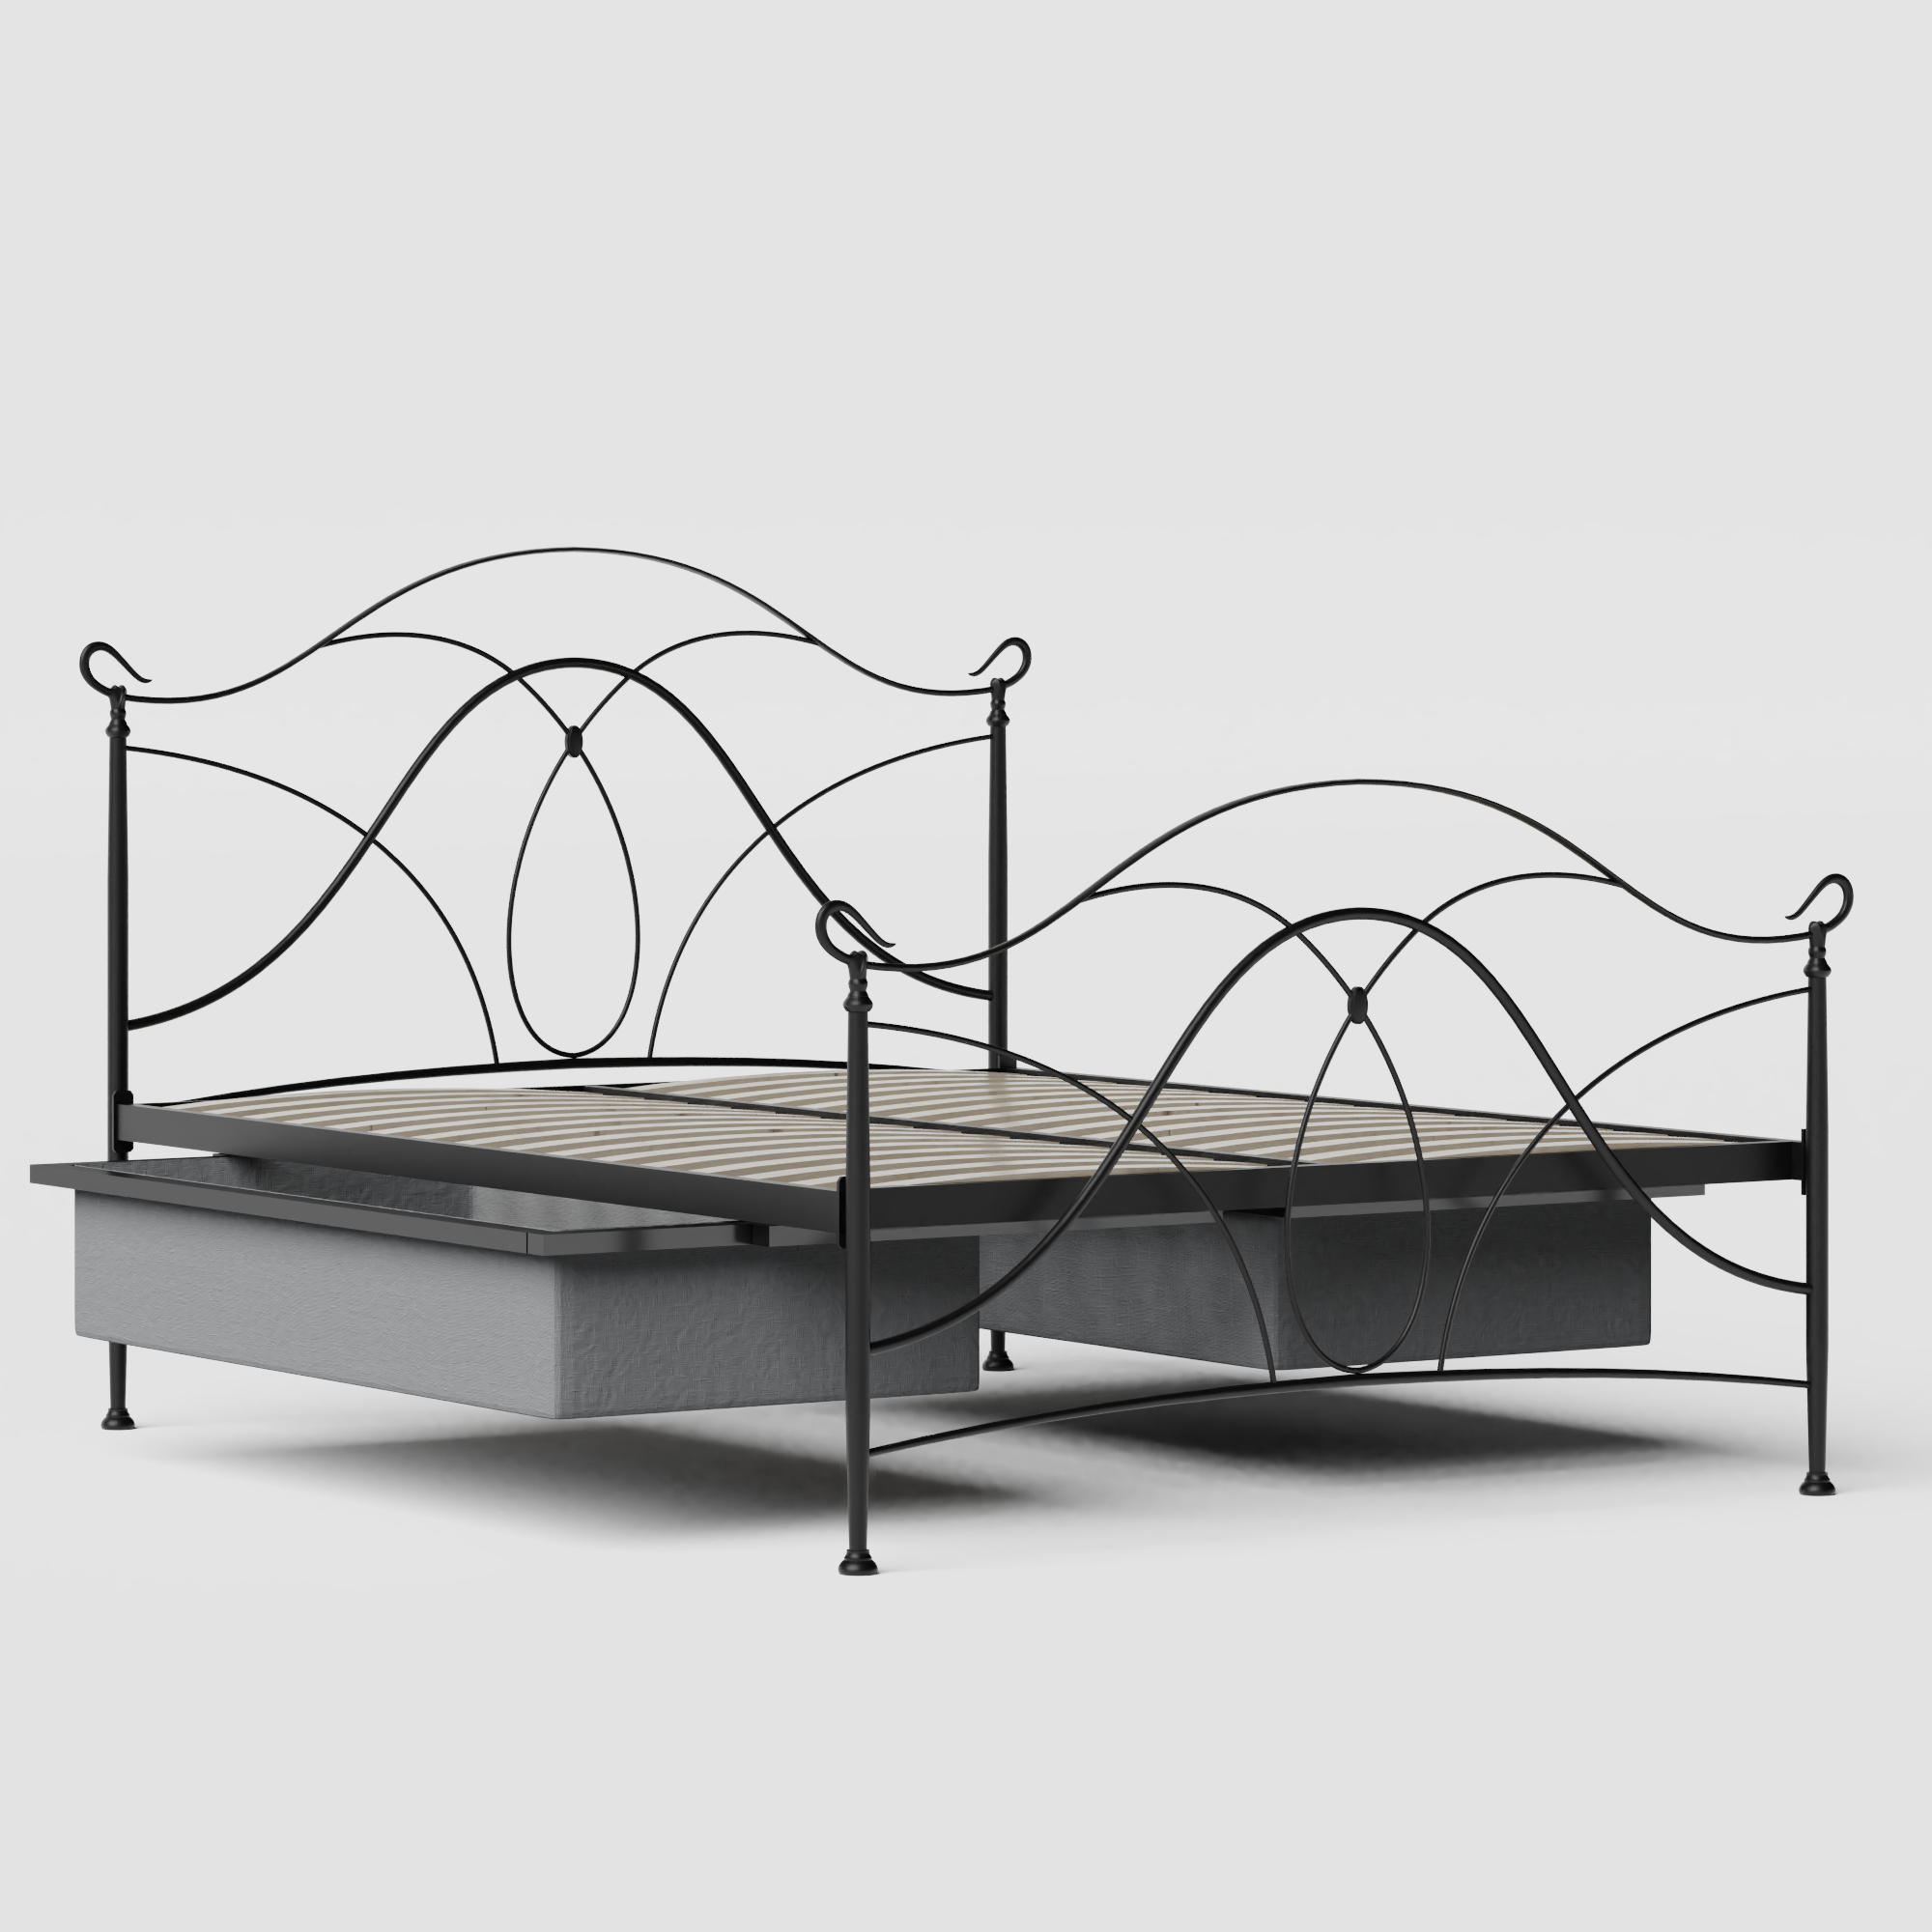 Ardo iron/metal bed in black with drawers